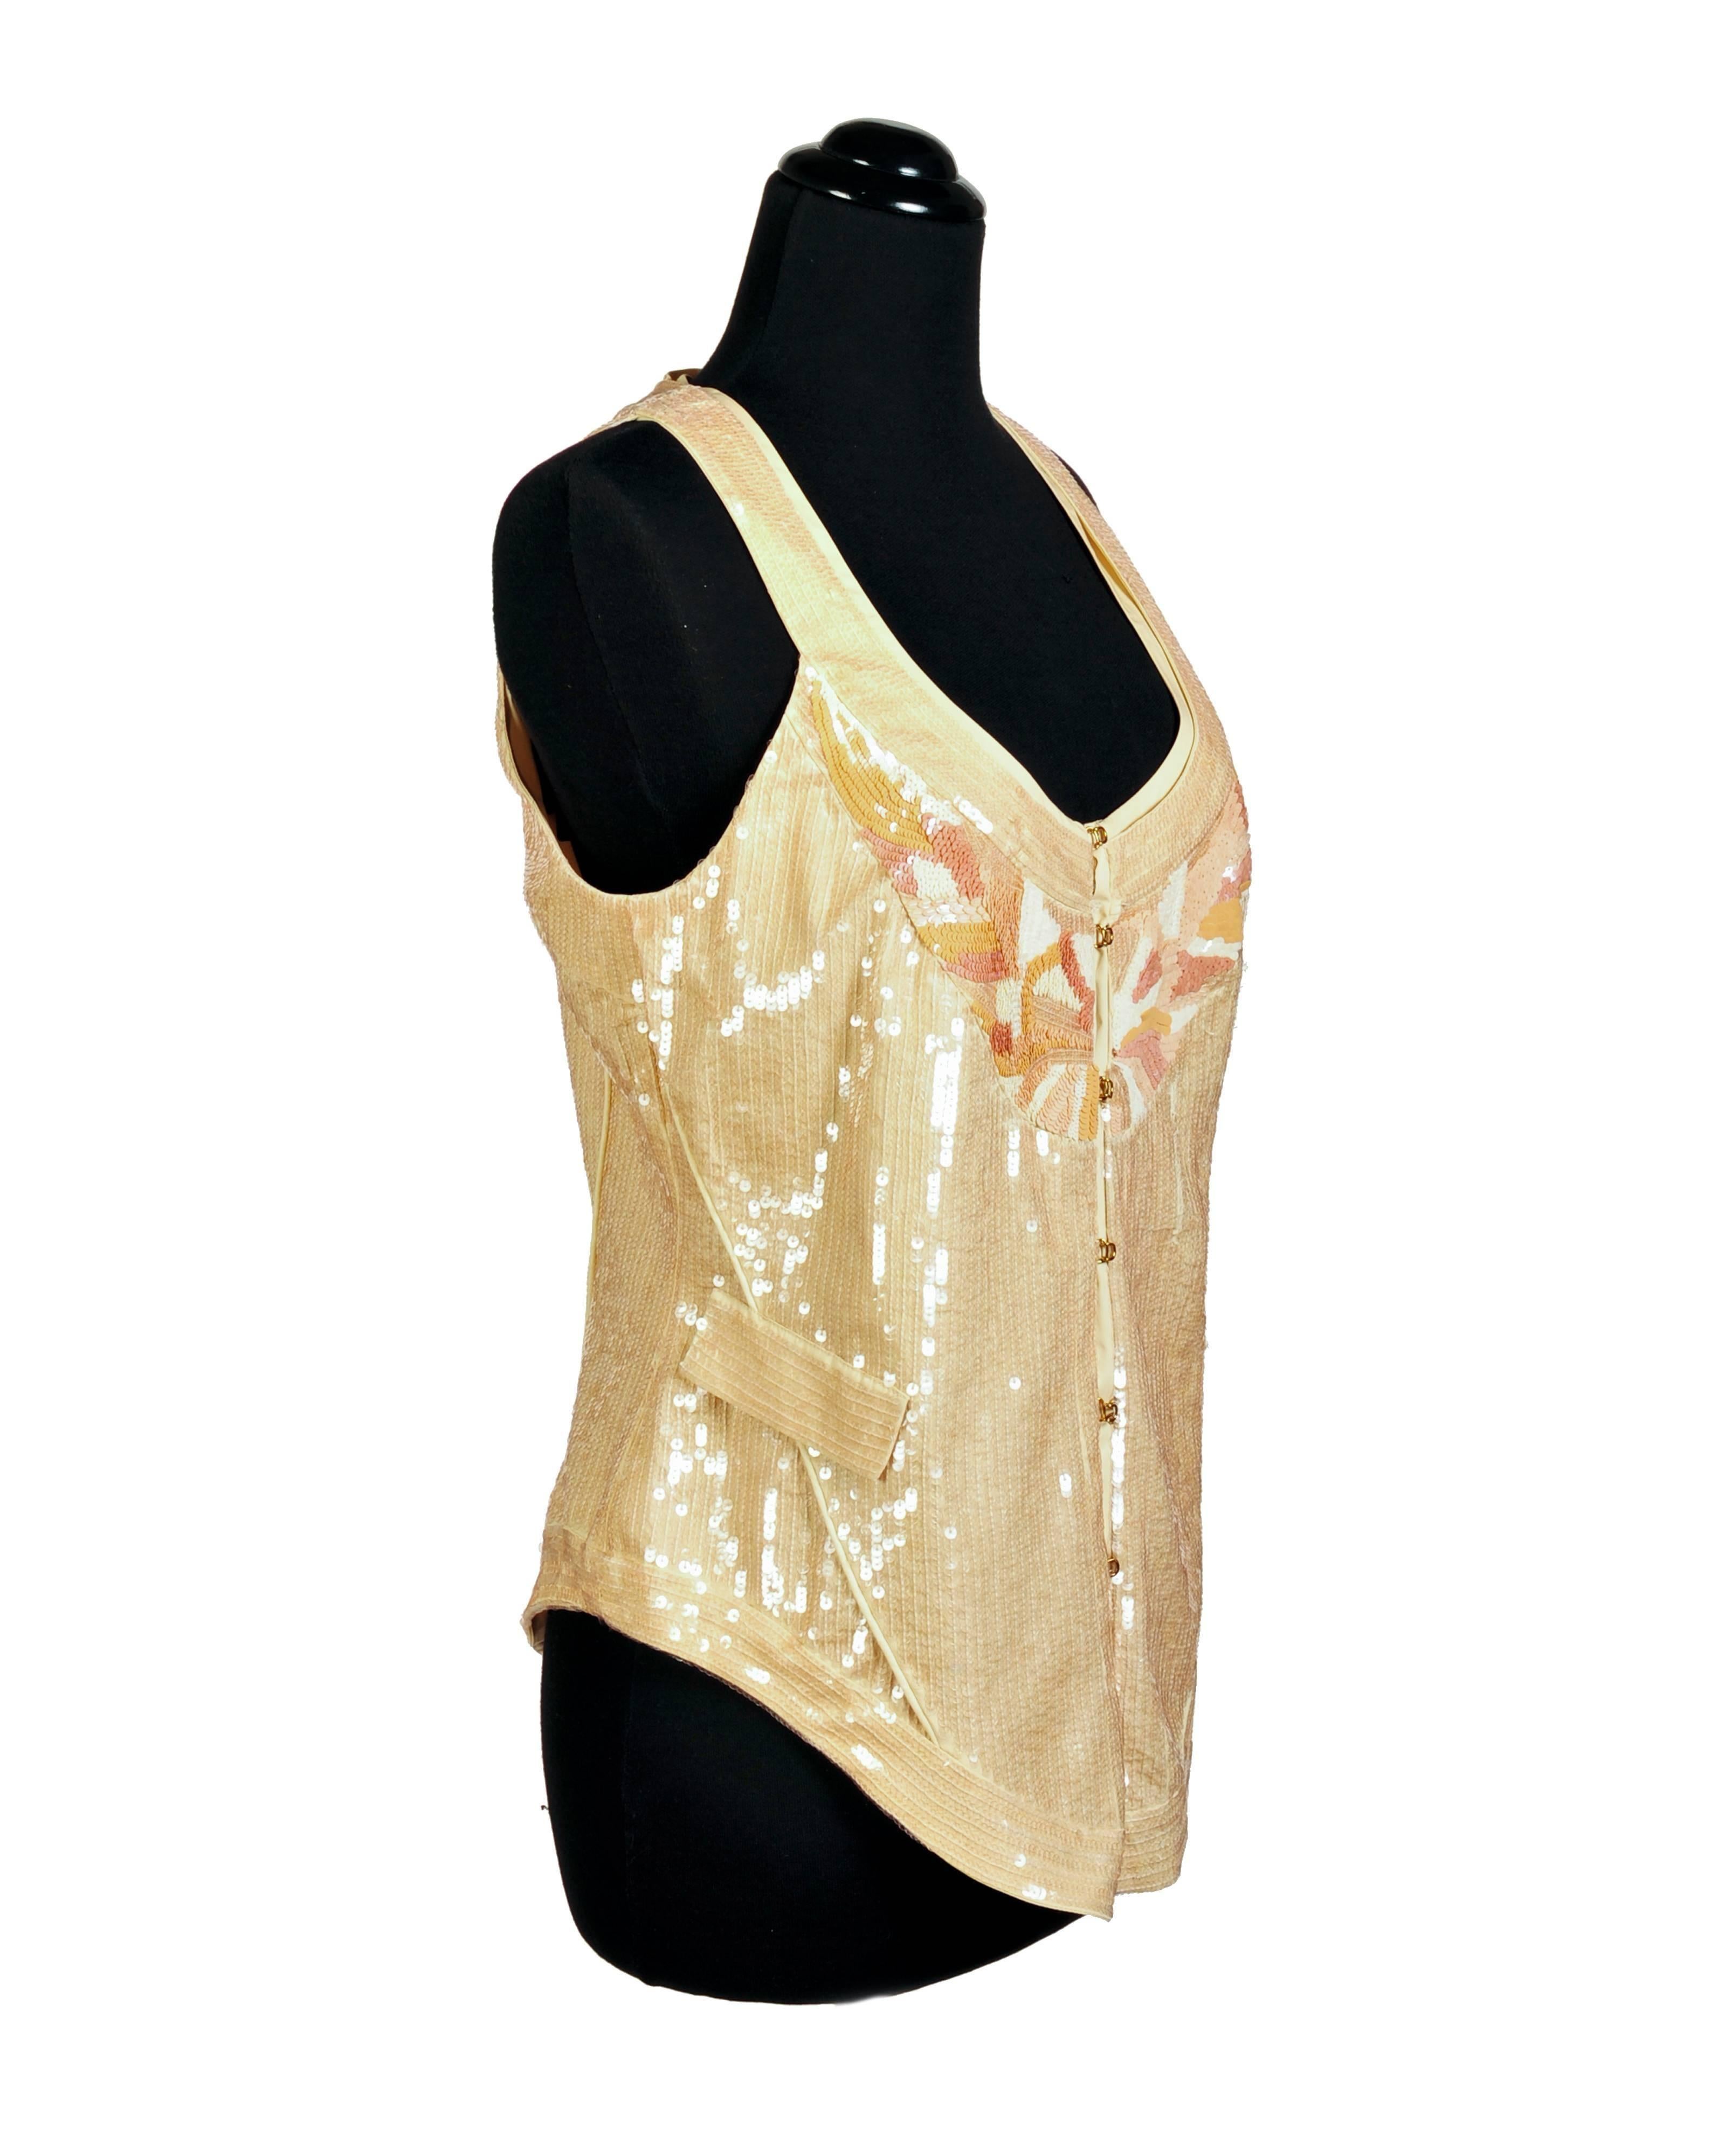 Vintage Roberto Cavalli Nude Sequin Embellished Vest
Italian Size 42 - US 6
Color: Nude, Corset style.
Made in Italy. 
New with tag.